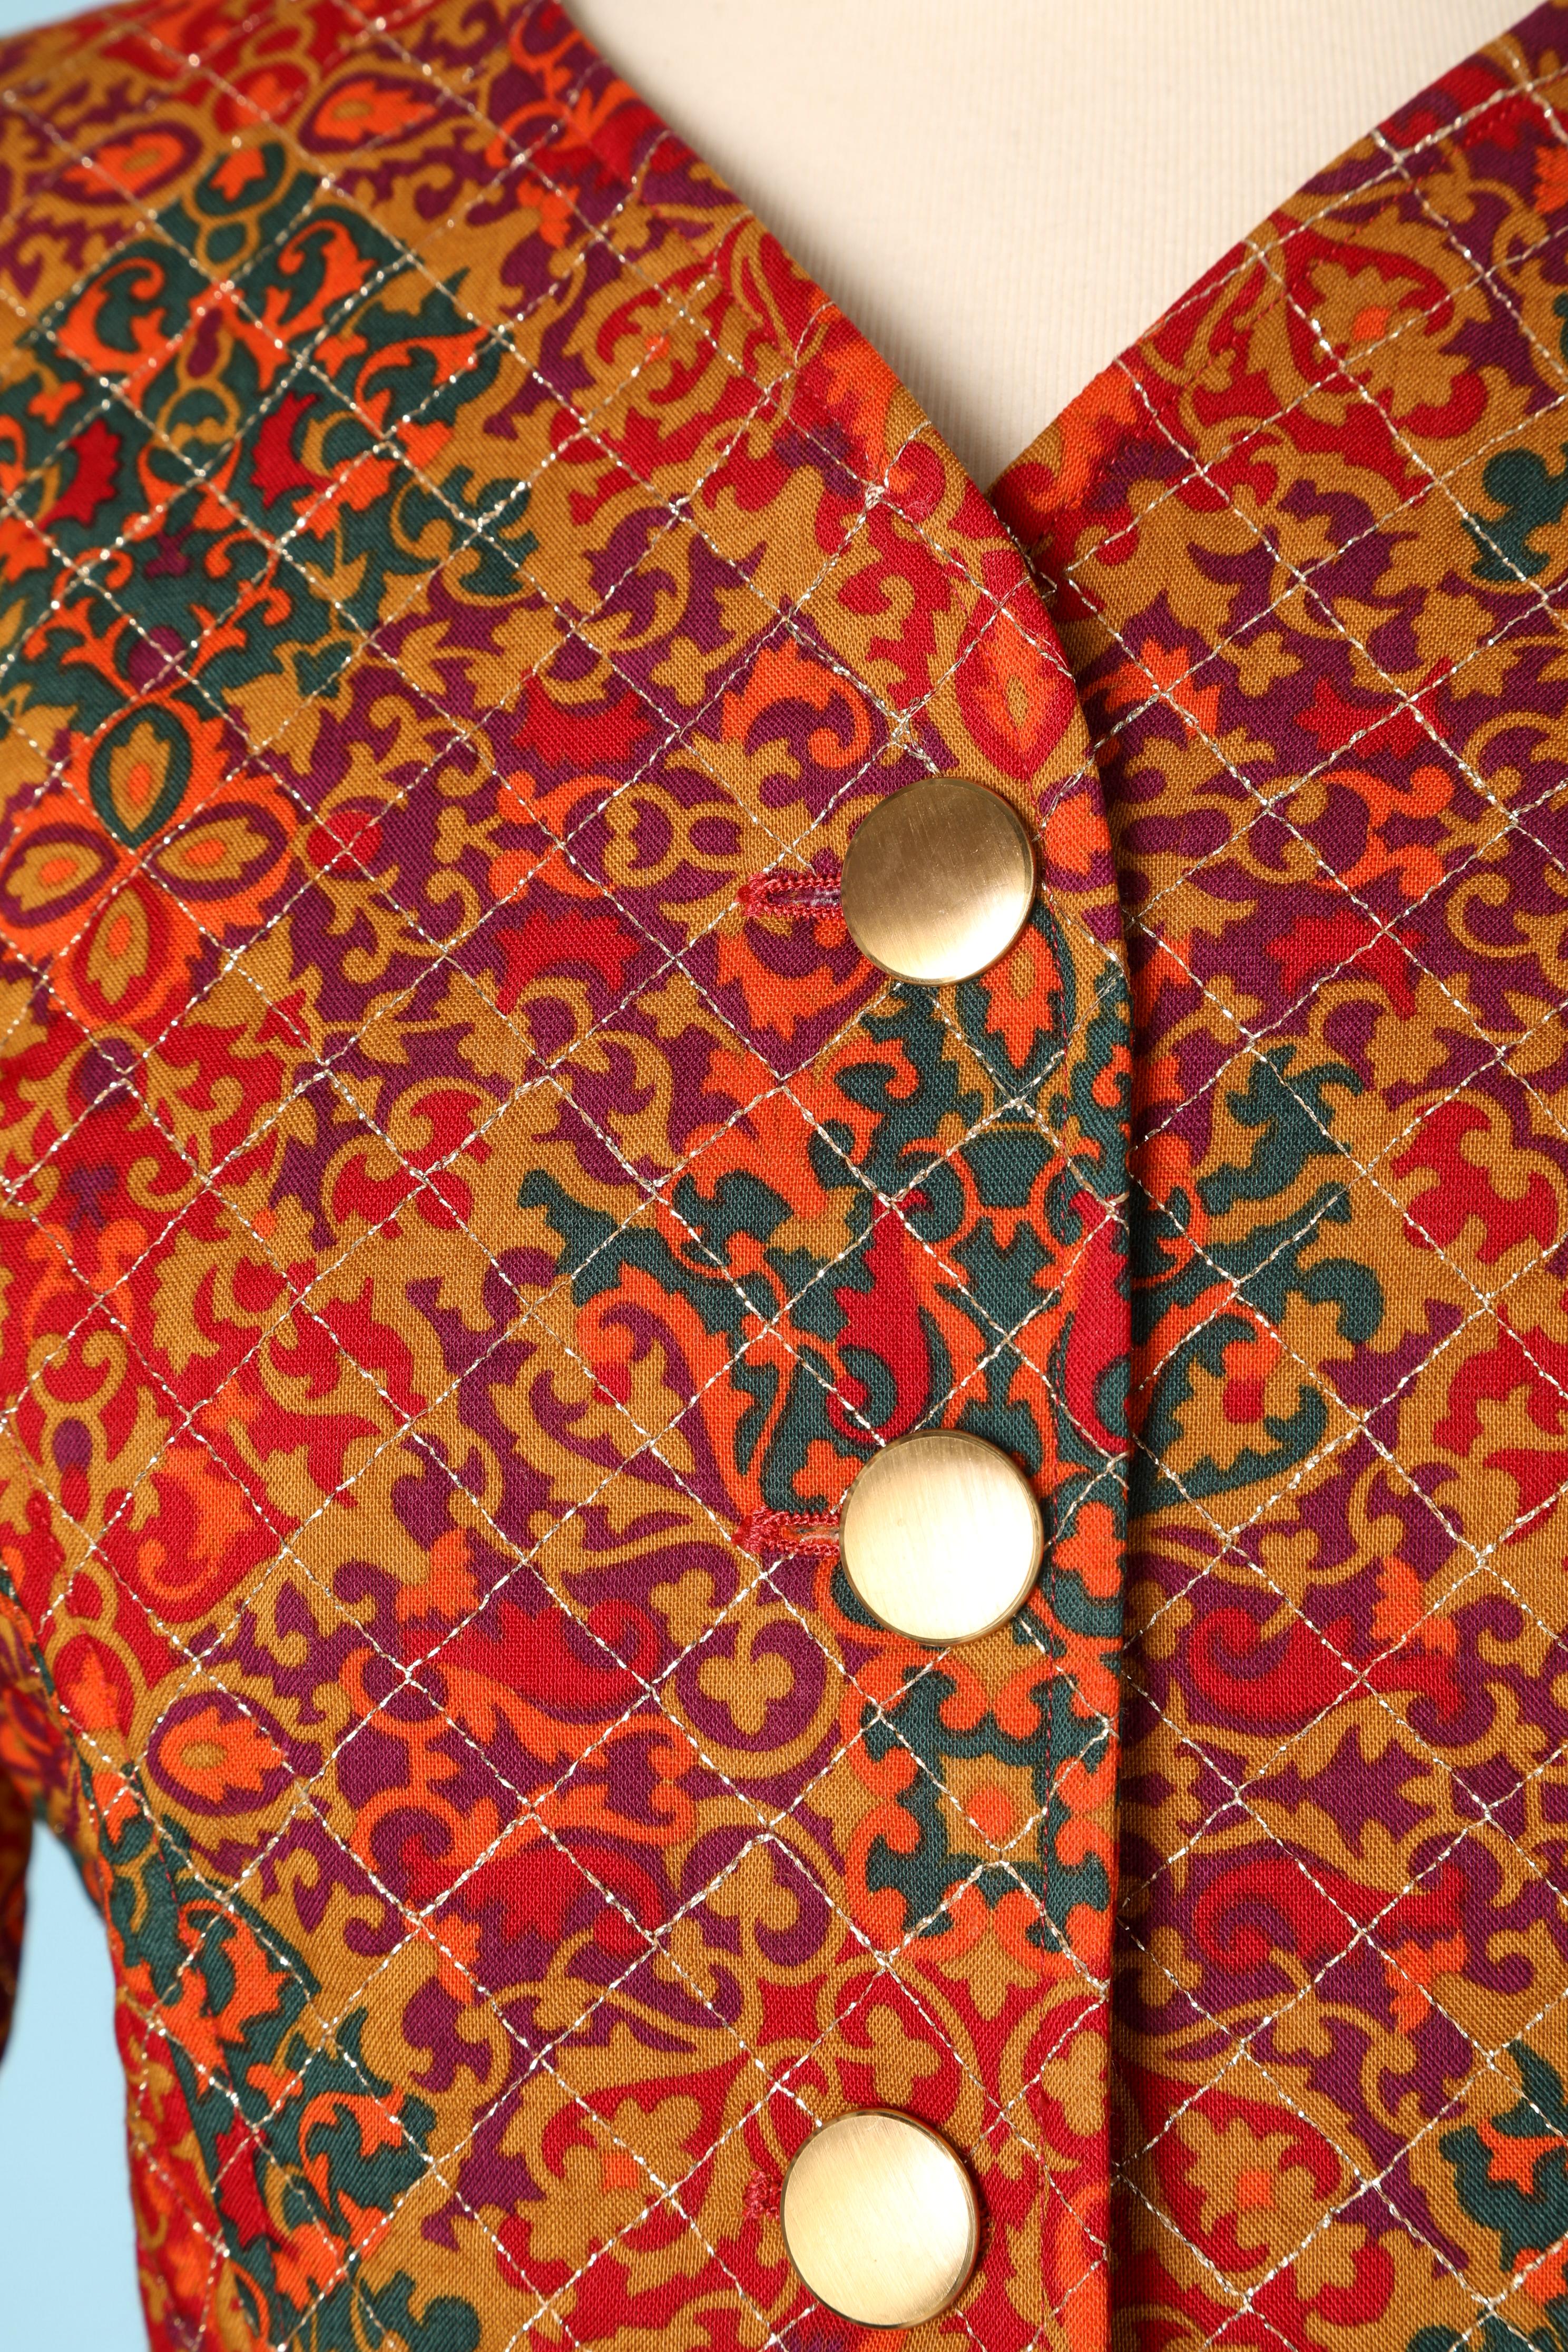 Quilted printed cotton jacket with gold lurex thread top-stitching and gold metal buttons.
Copper satin lining.